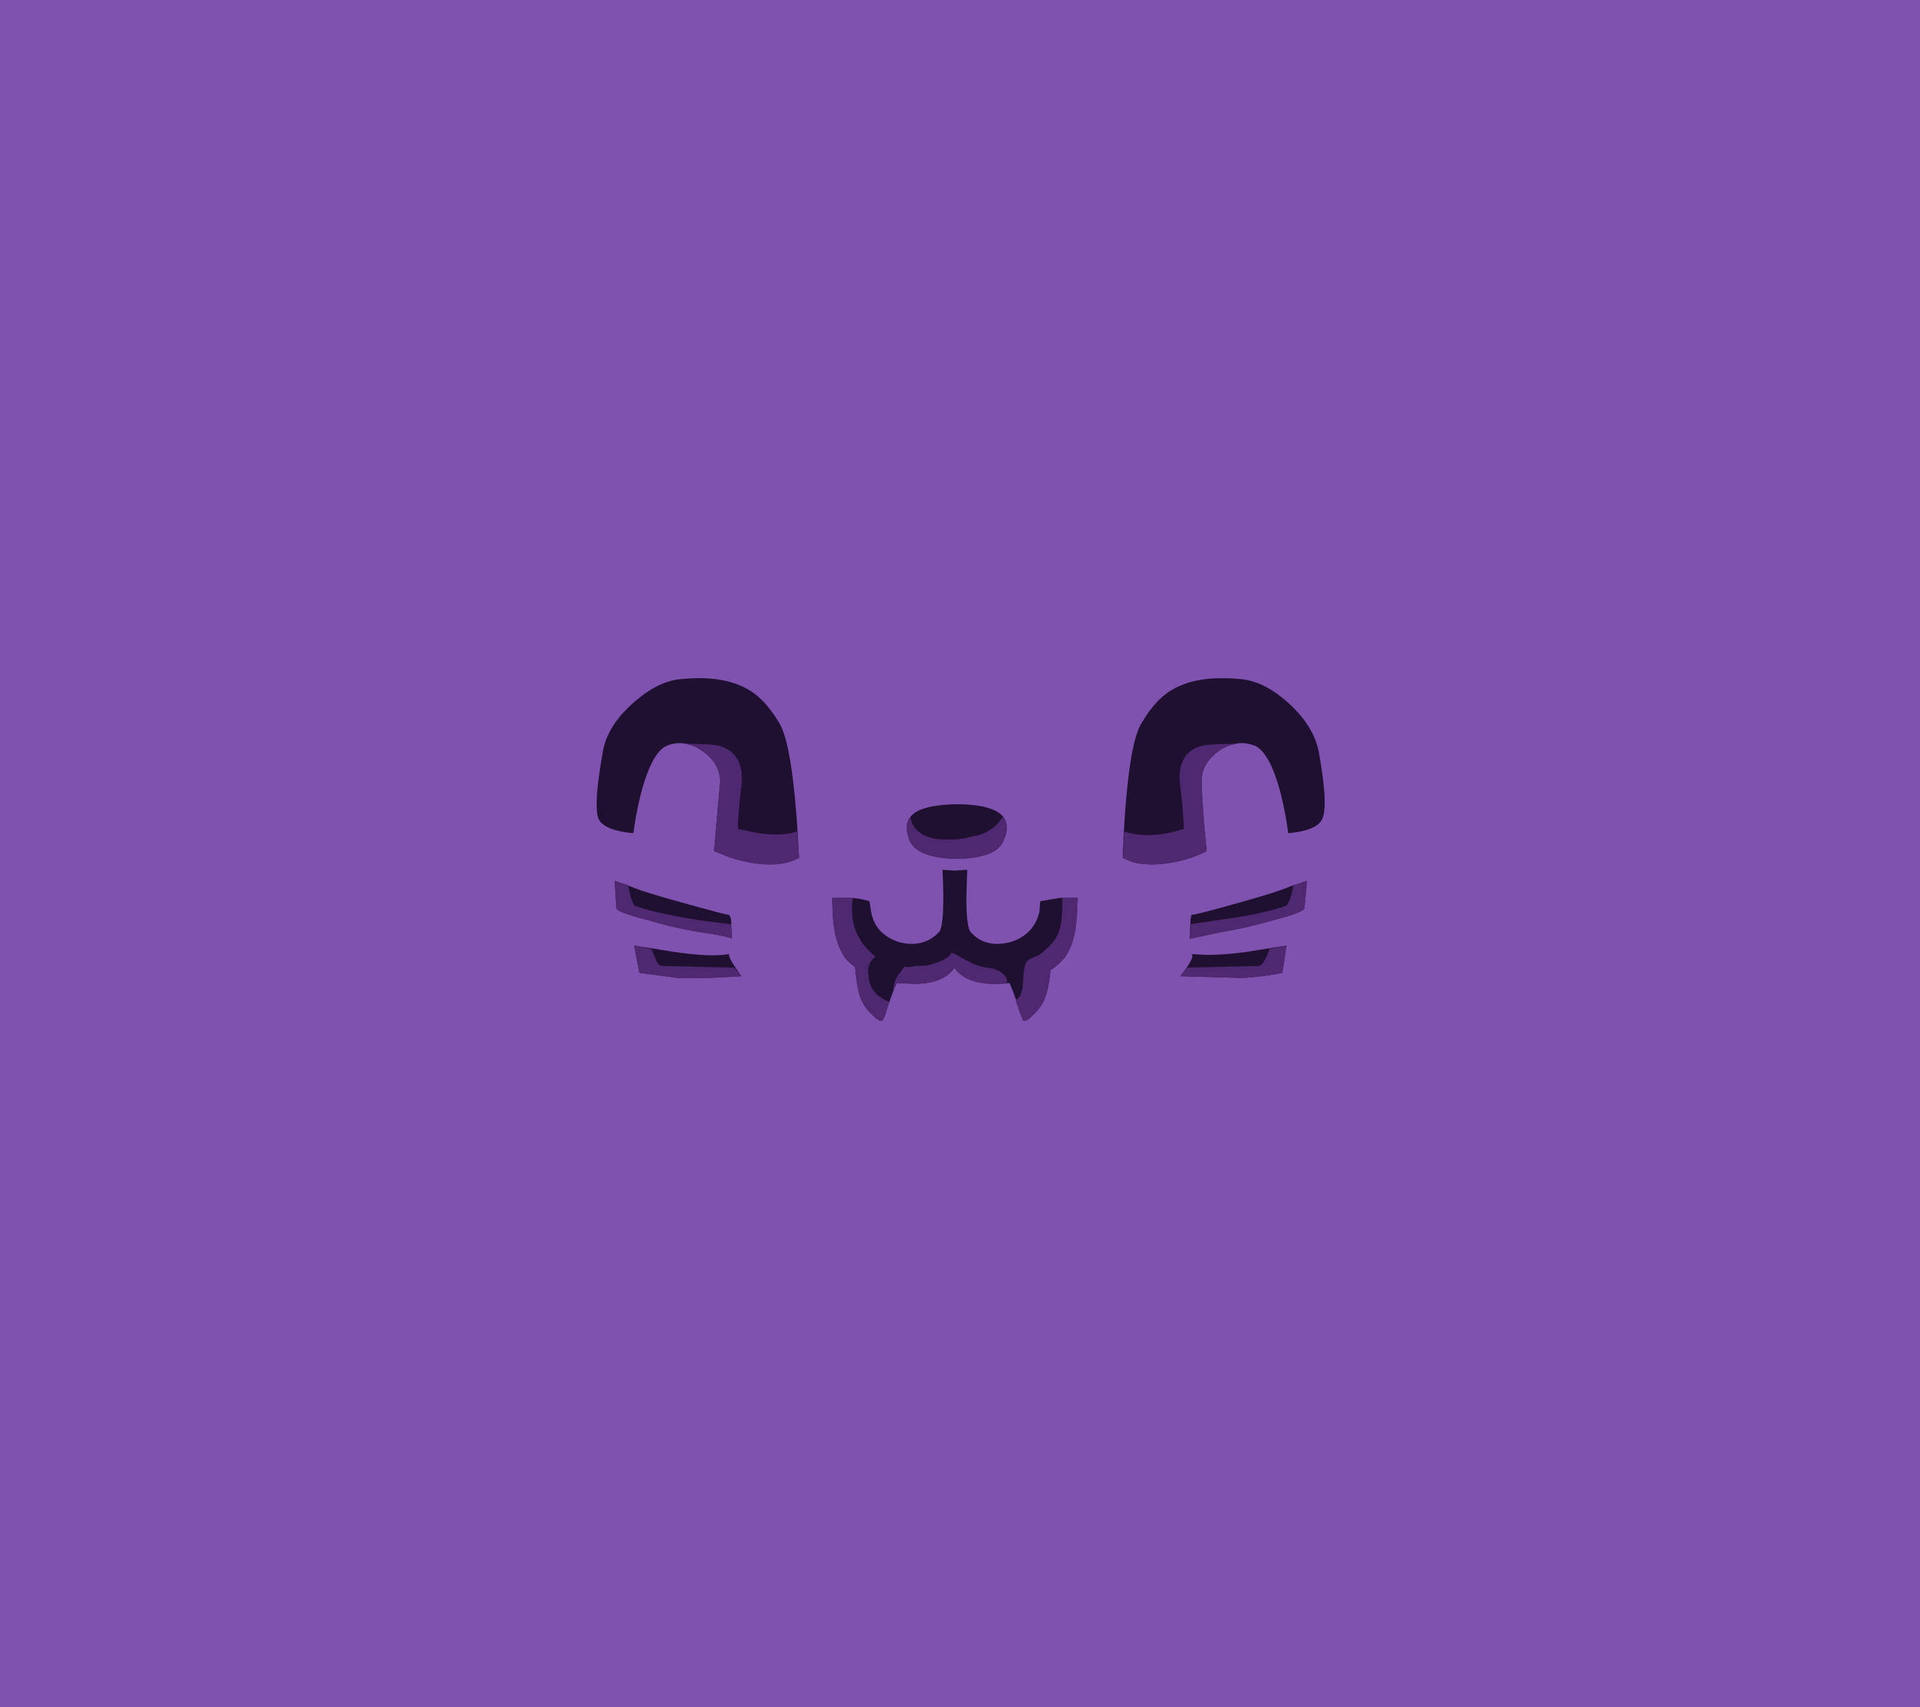 Fanged Mouth On Cute Purple Background